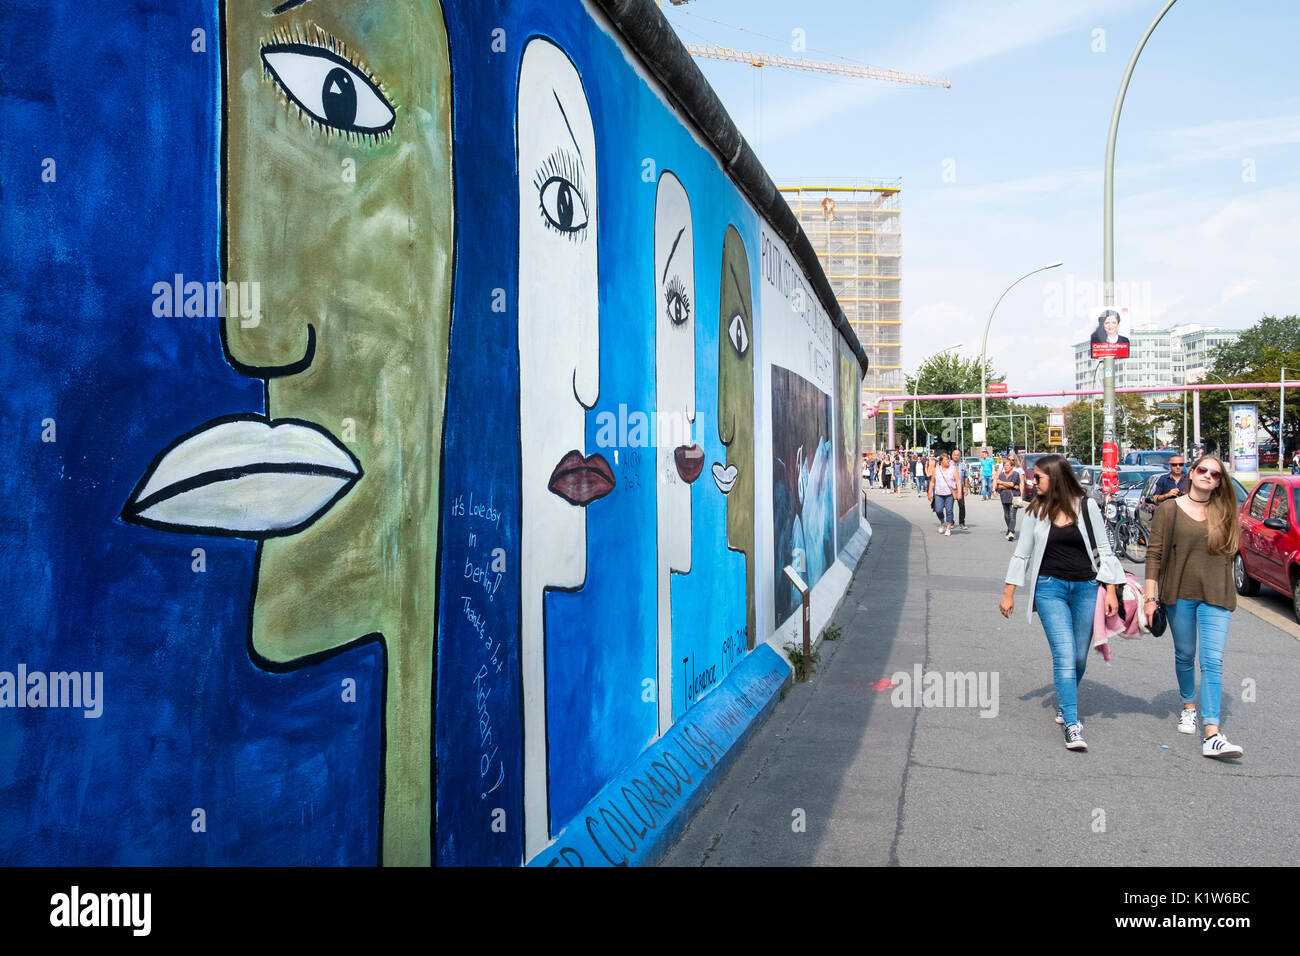 mural painted on original section of Berlin Wall at East Side gallery in Berlin, Germany Stock Photo